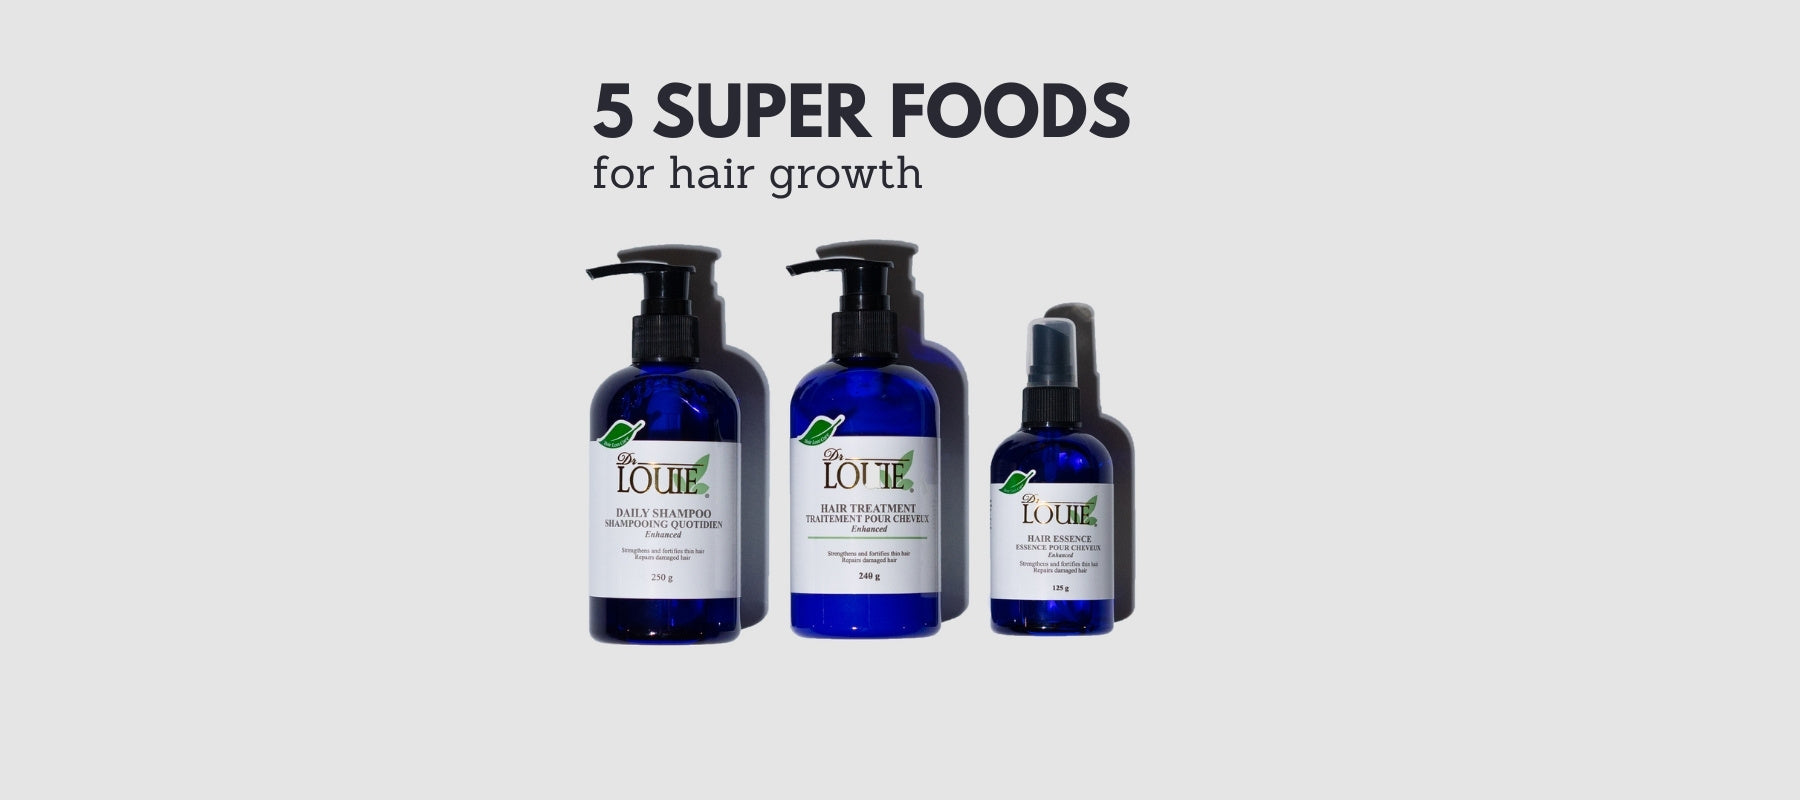 5 Superfoods for Hair Growth